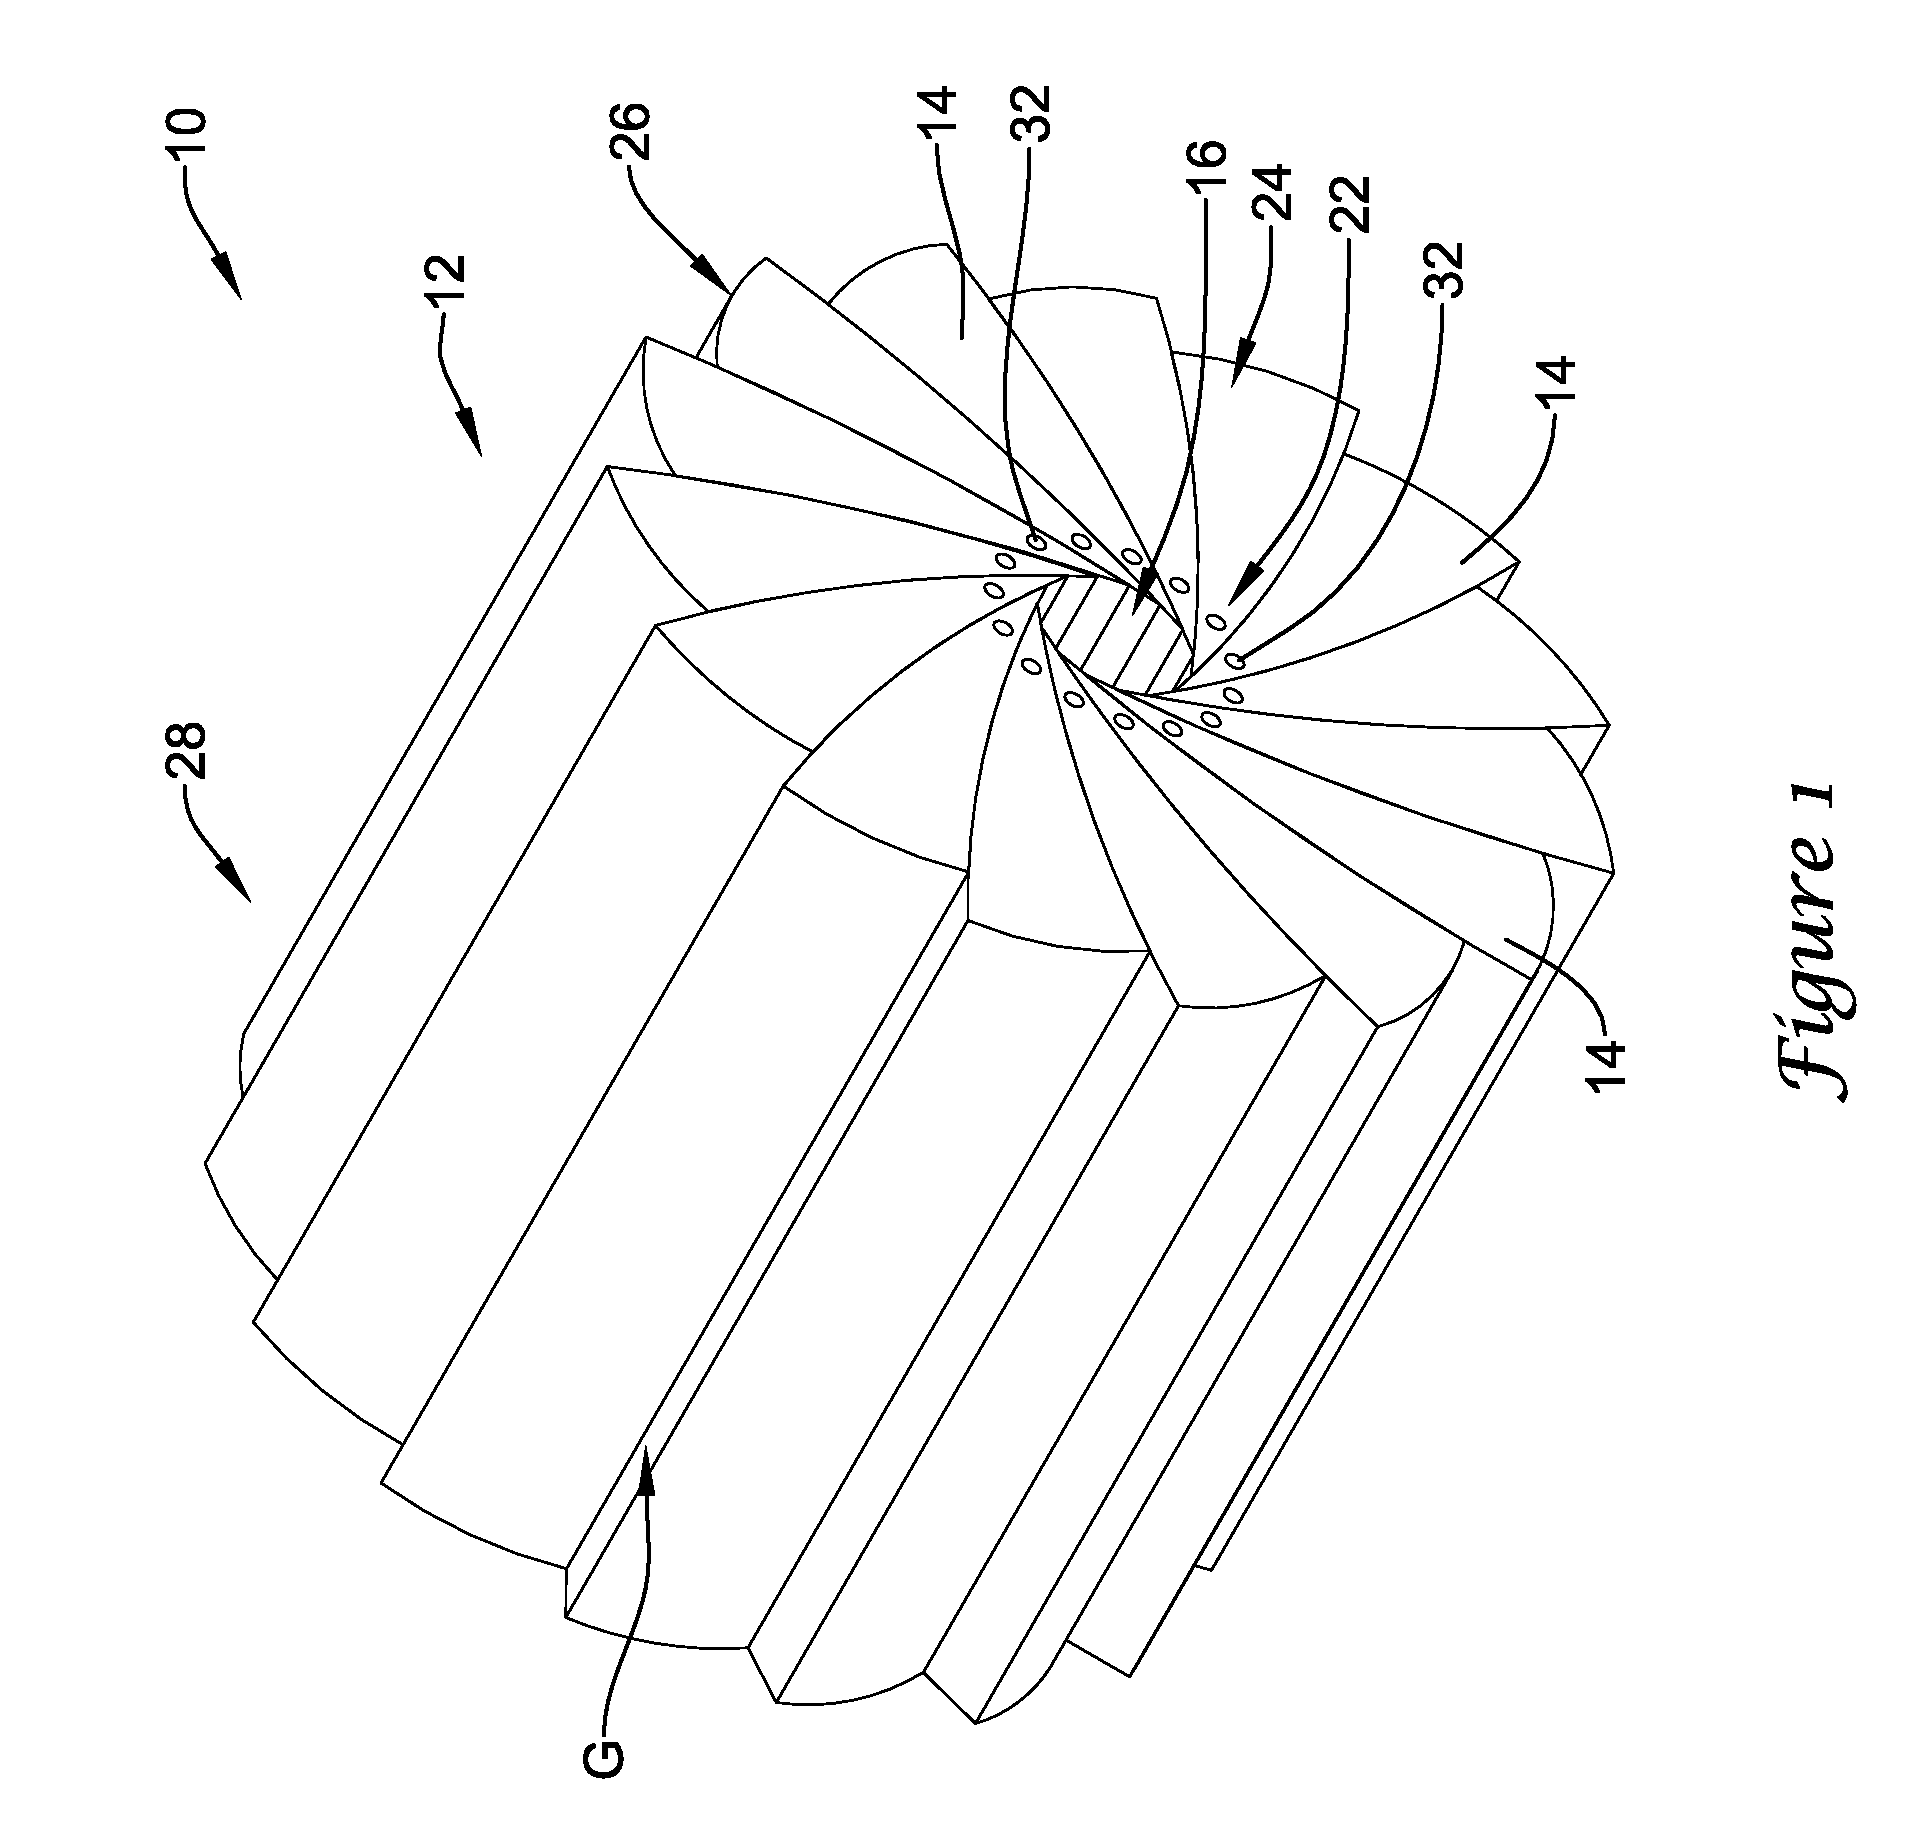 Methods for abluminally coating medical devices